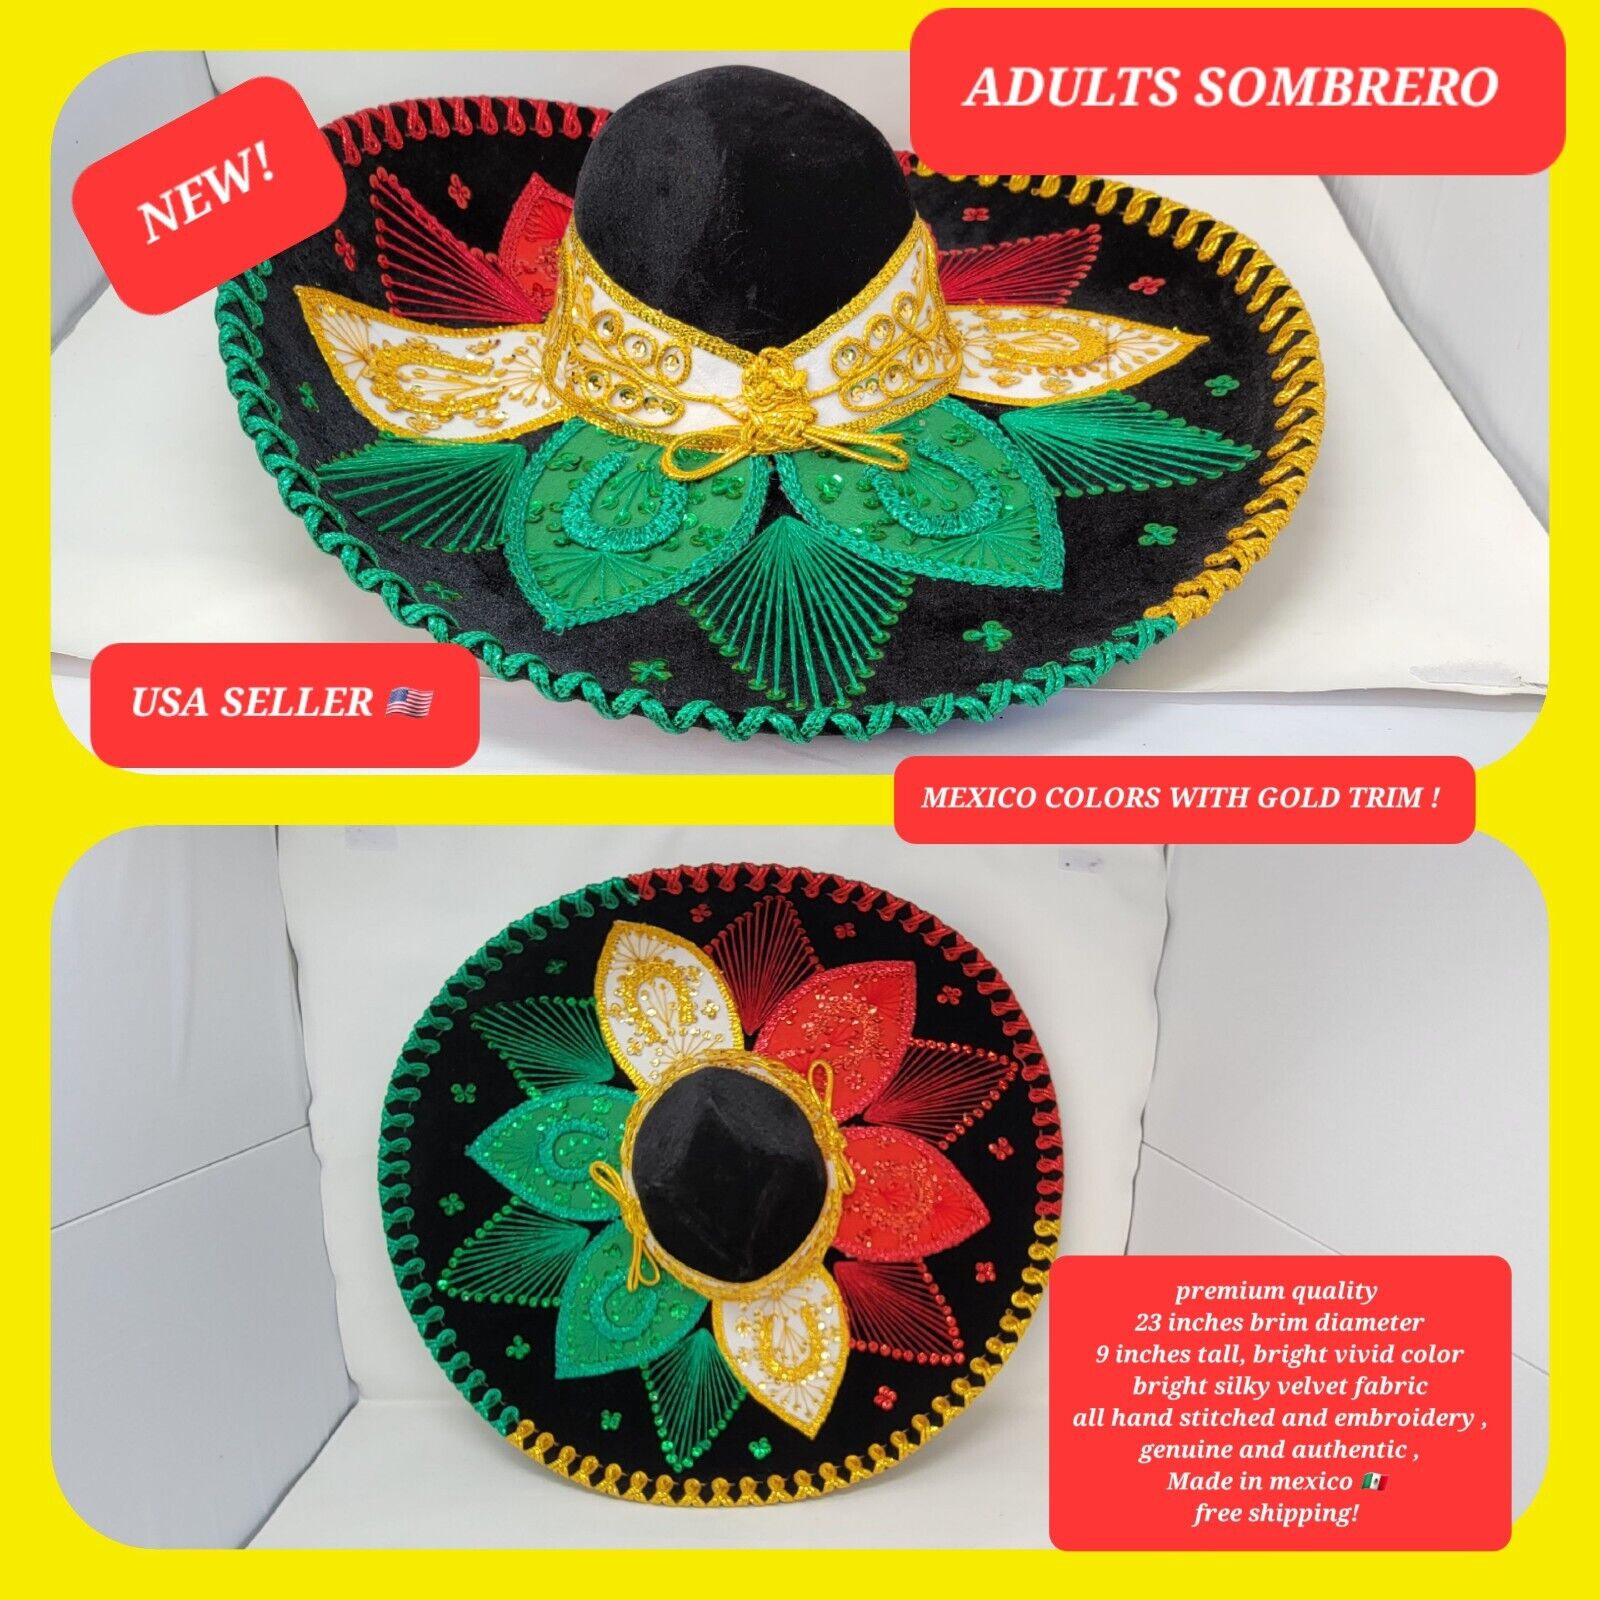 MEXICO COLORS with gold trim adults sombrero charro mariachi hat